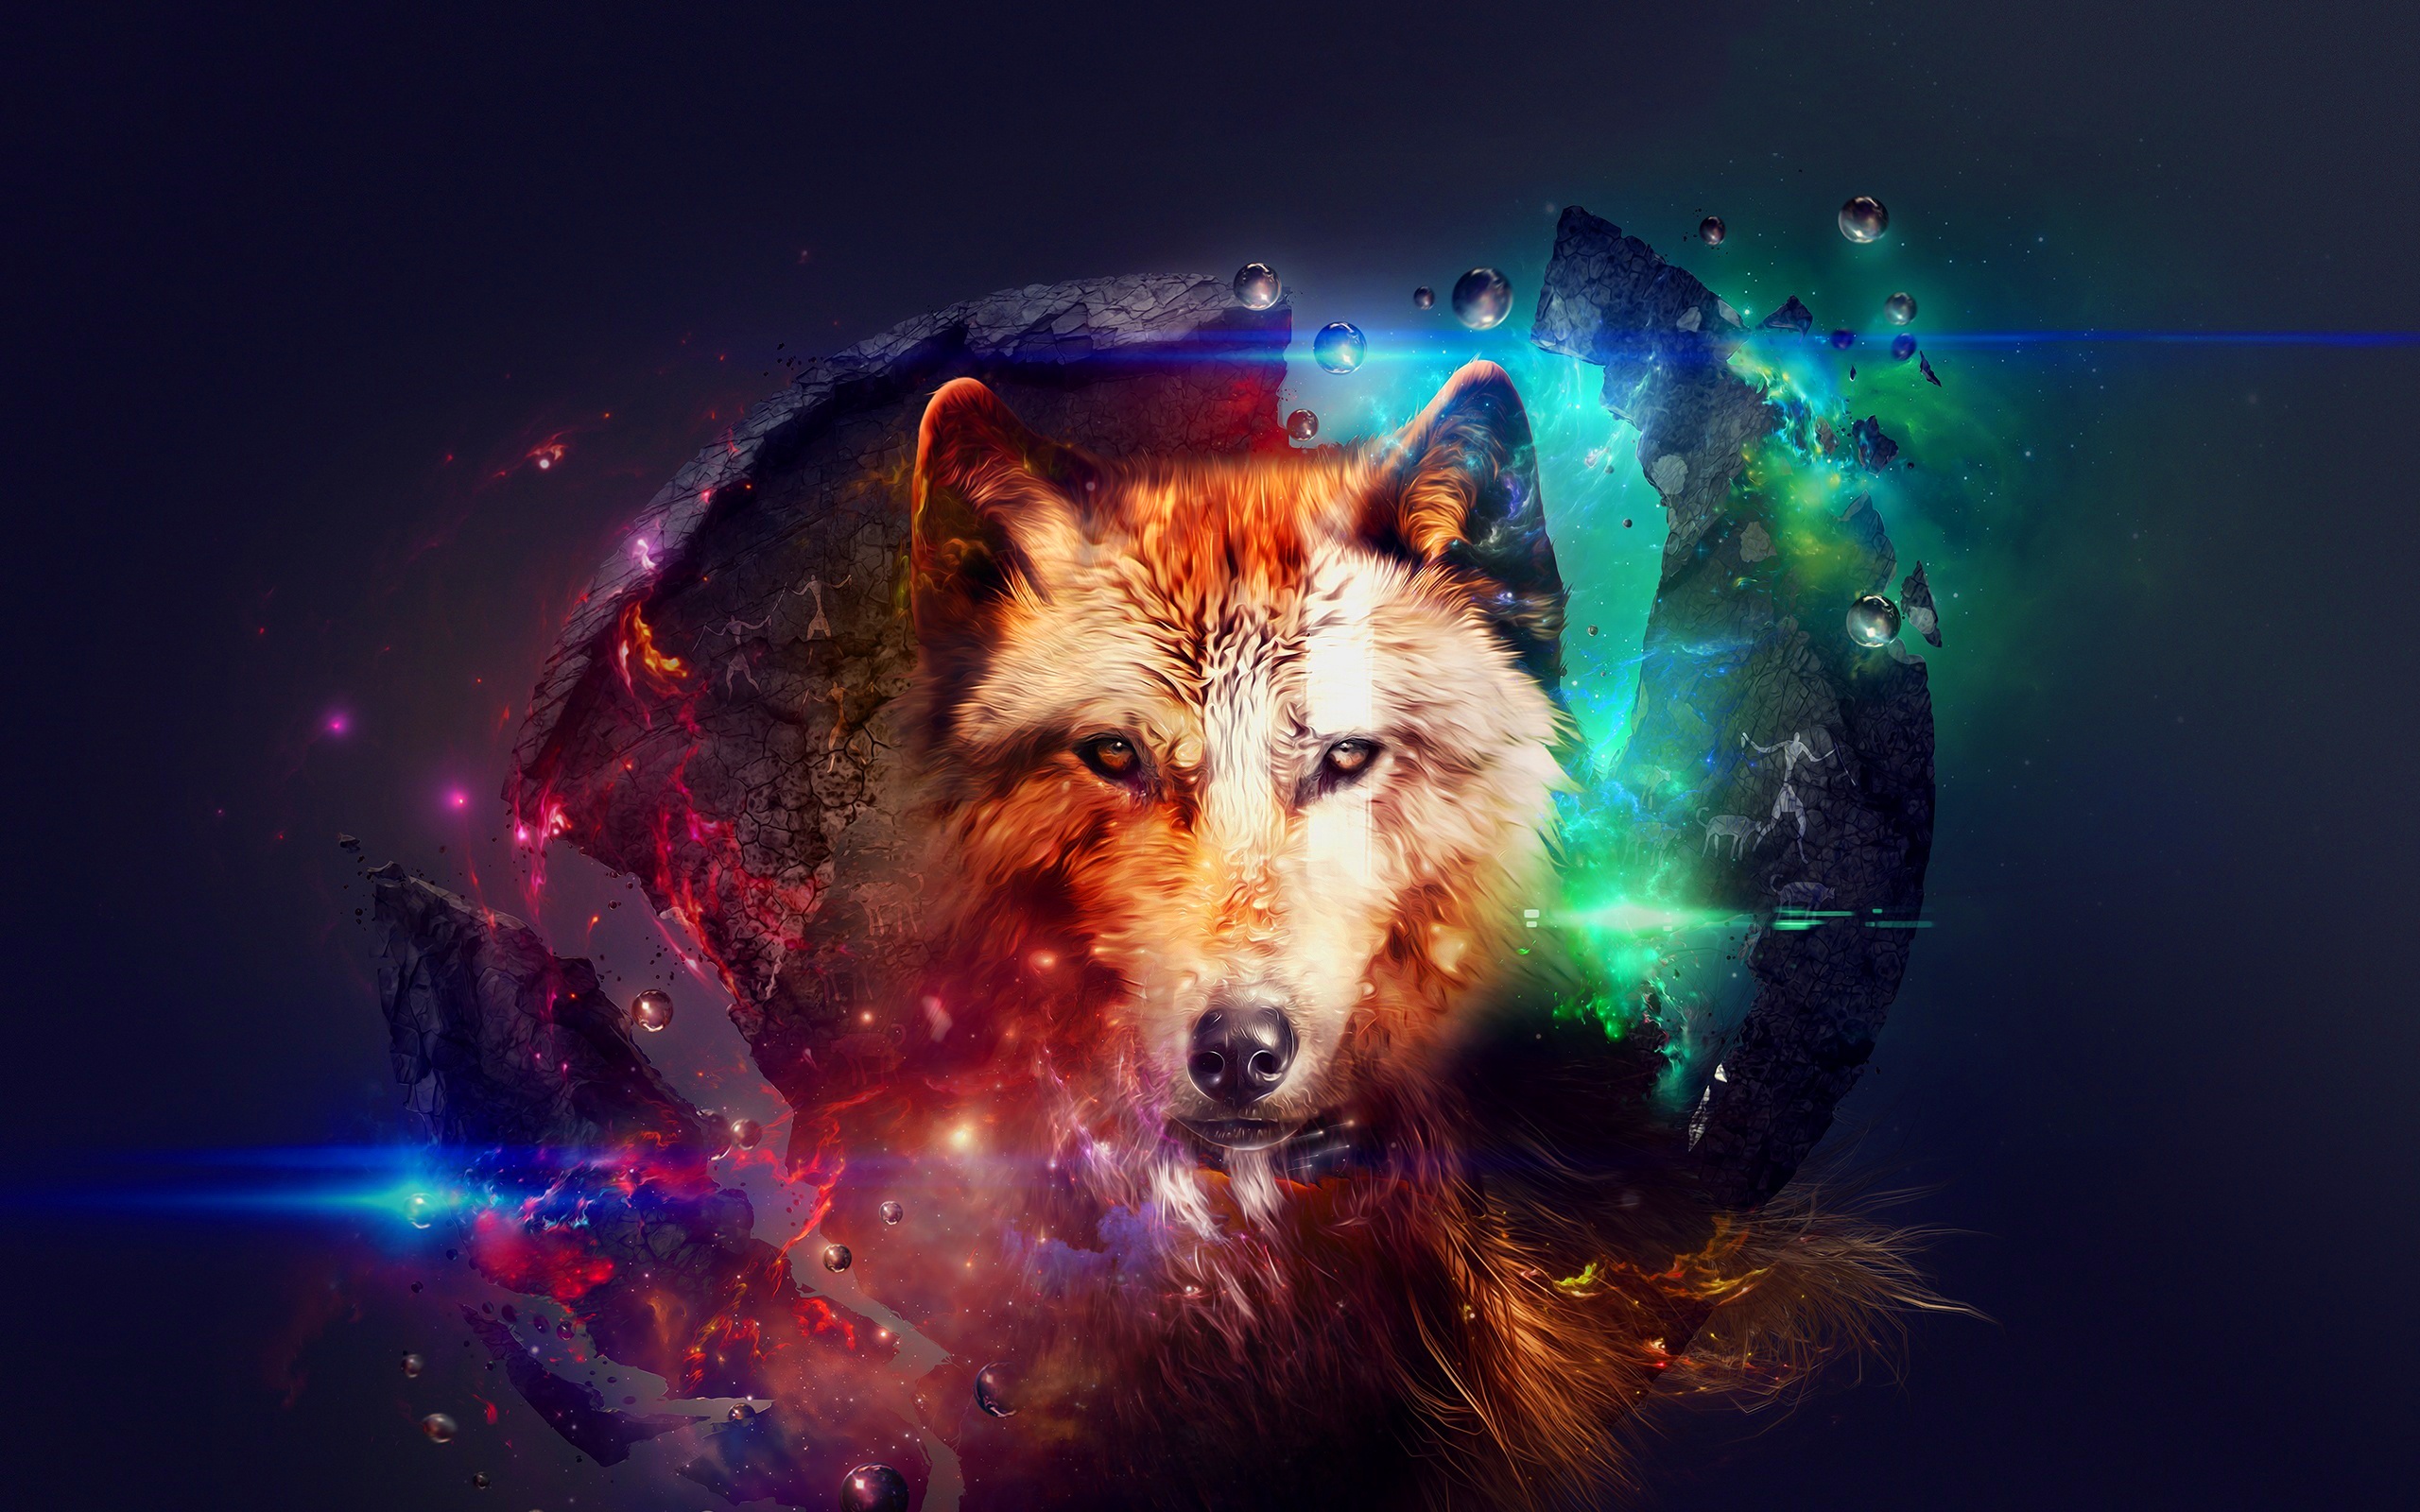 Wolf Art Photos Image Pics Pictures Wallpaper Image And Save